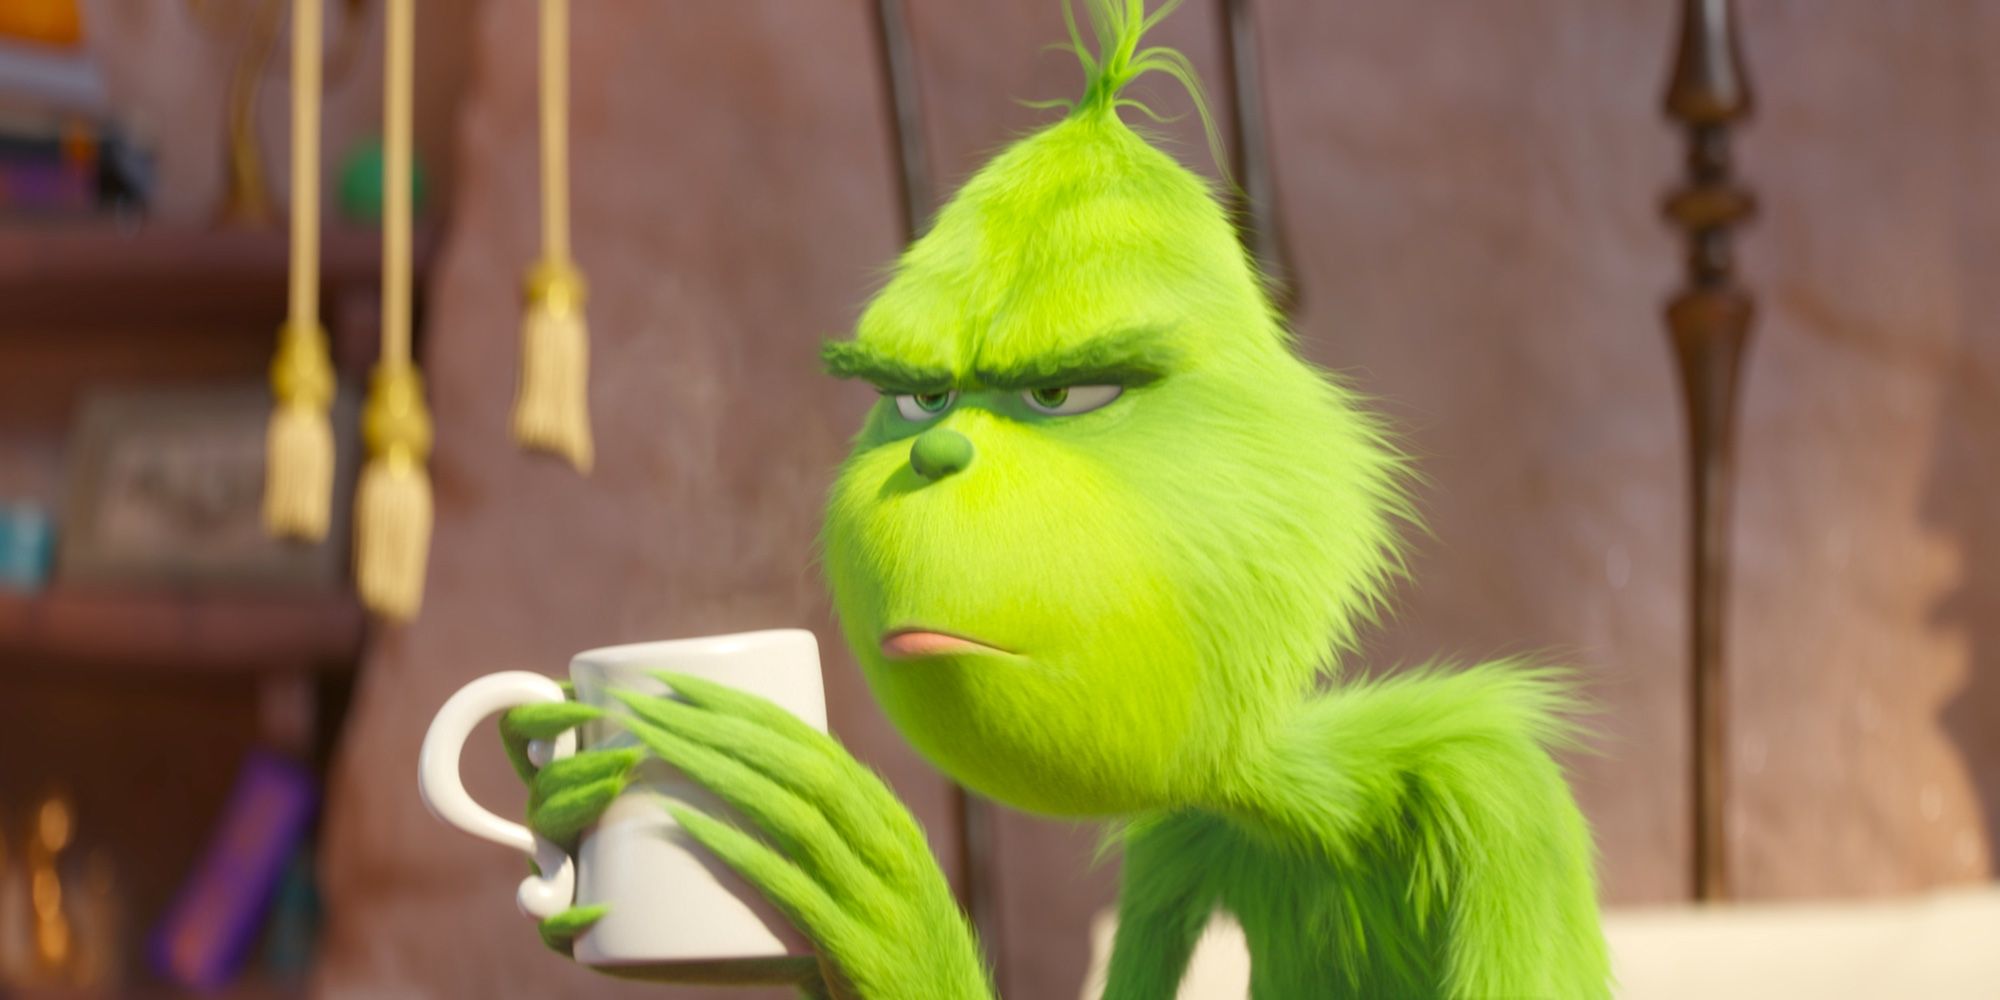 The Grinch making a grouchy face while holding a mug